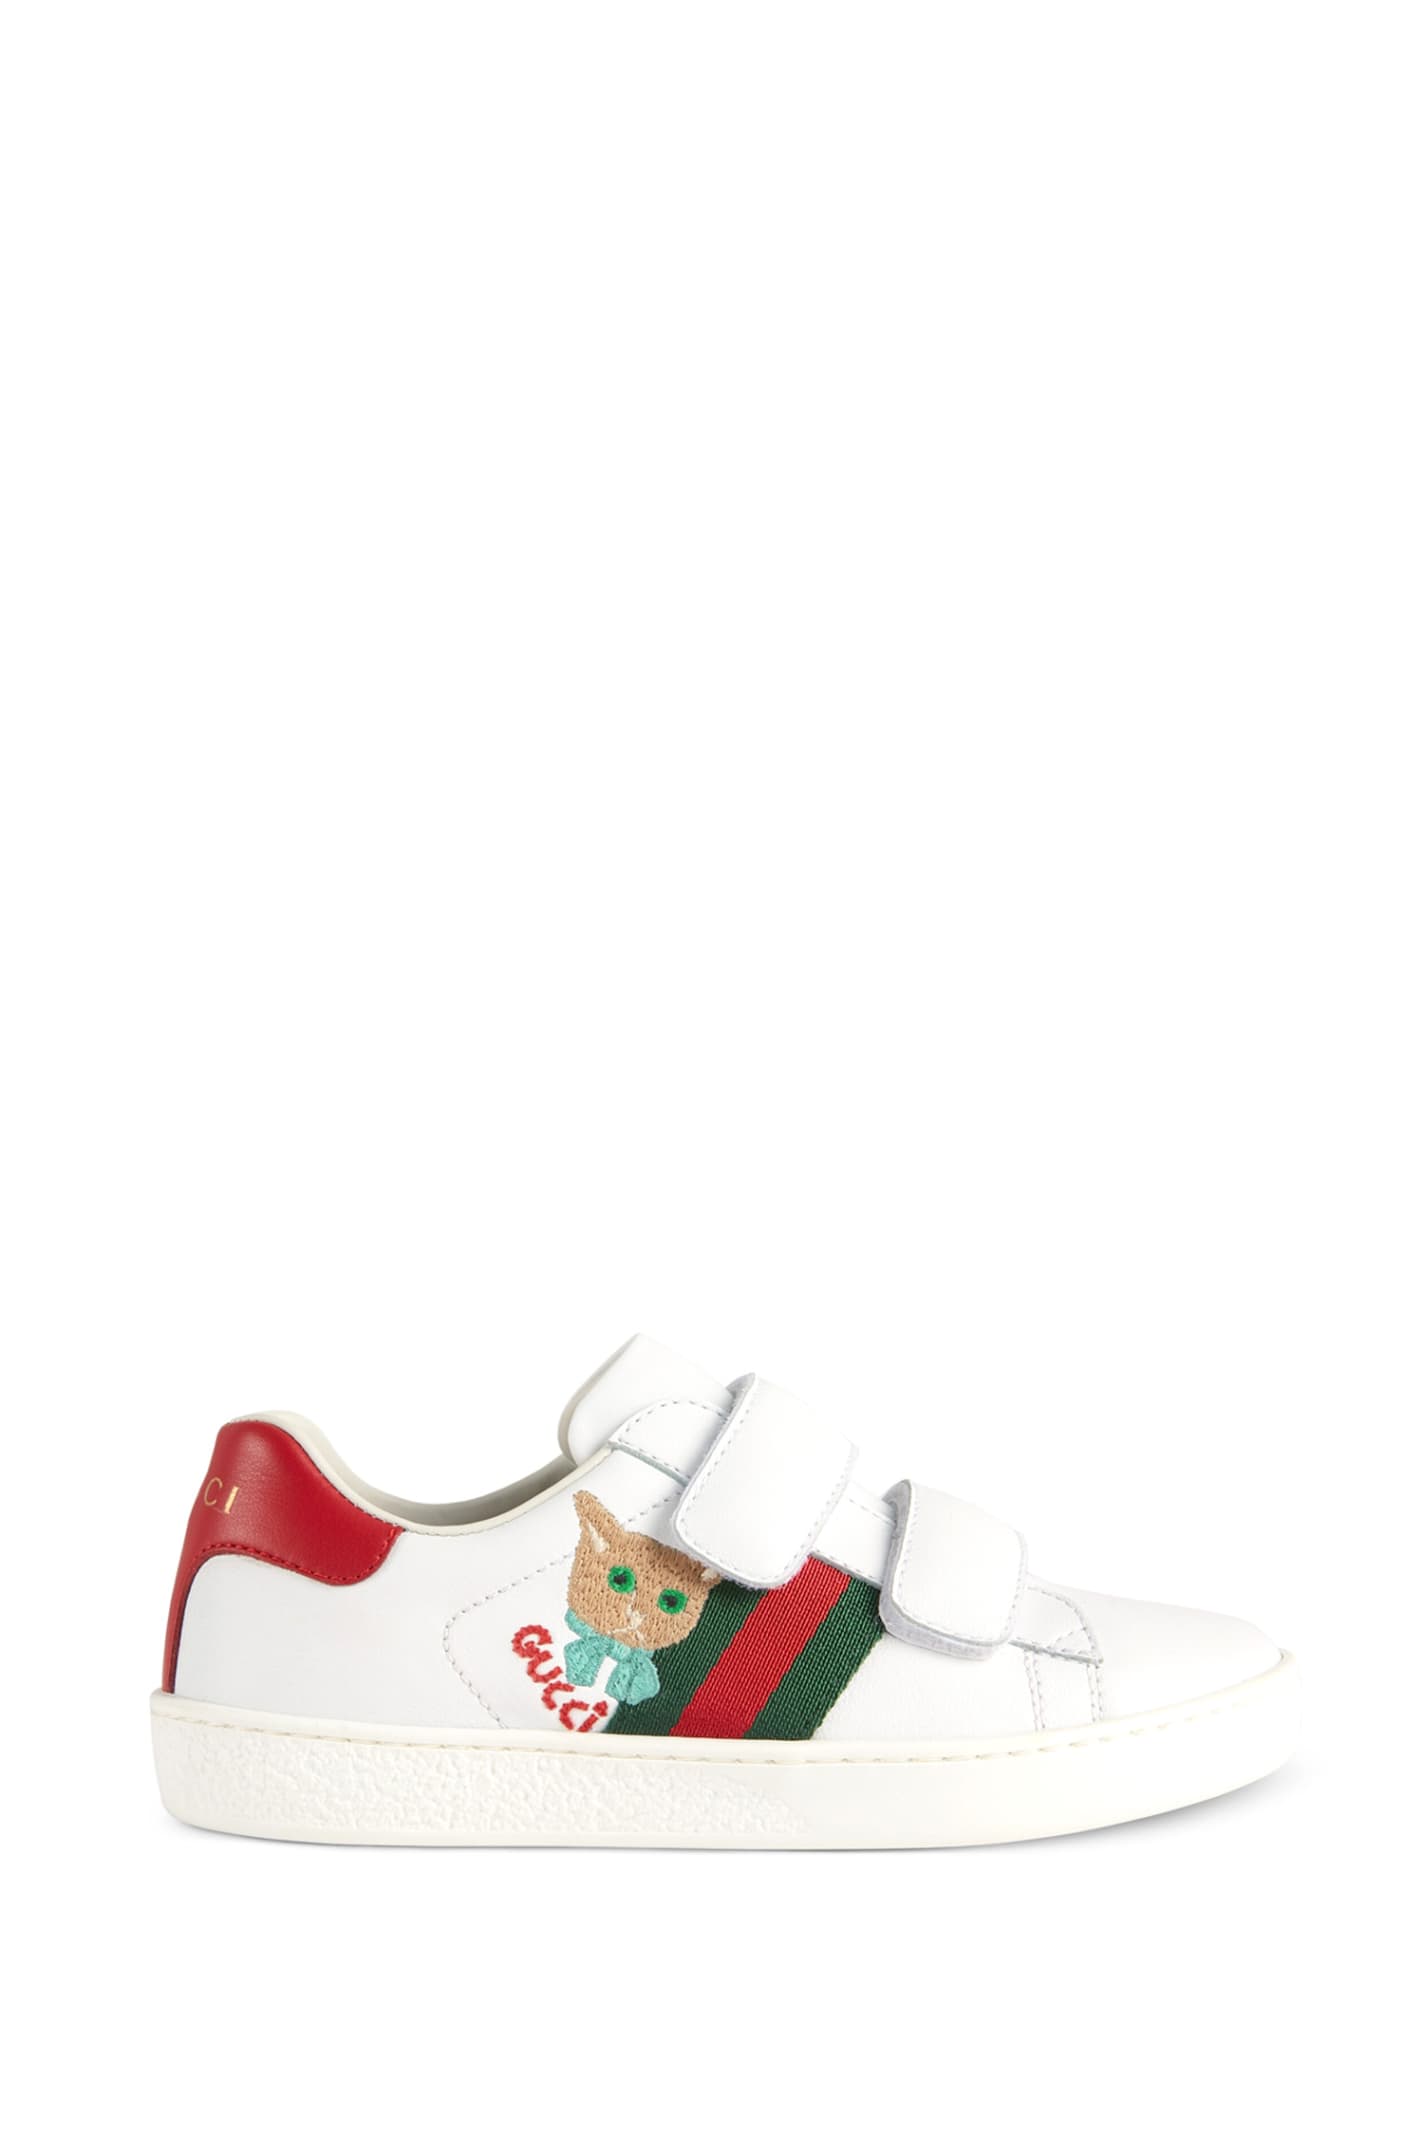 Gucci Ace Sneakers With Kitten